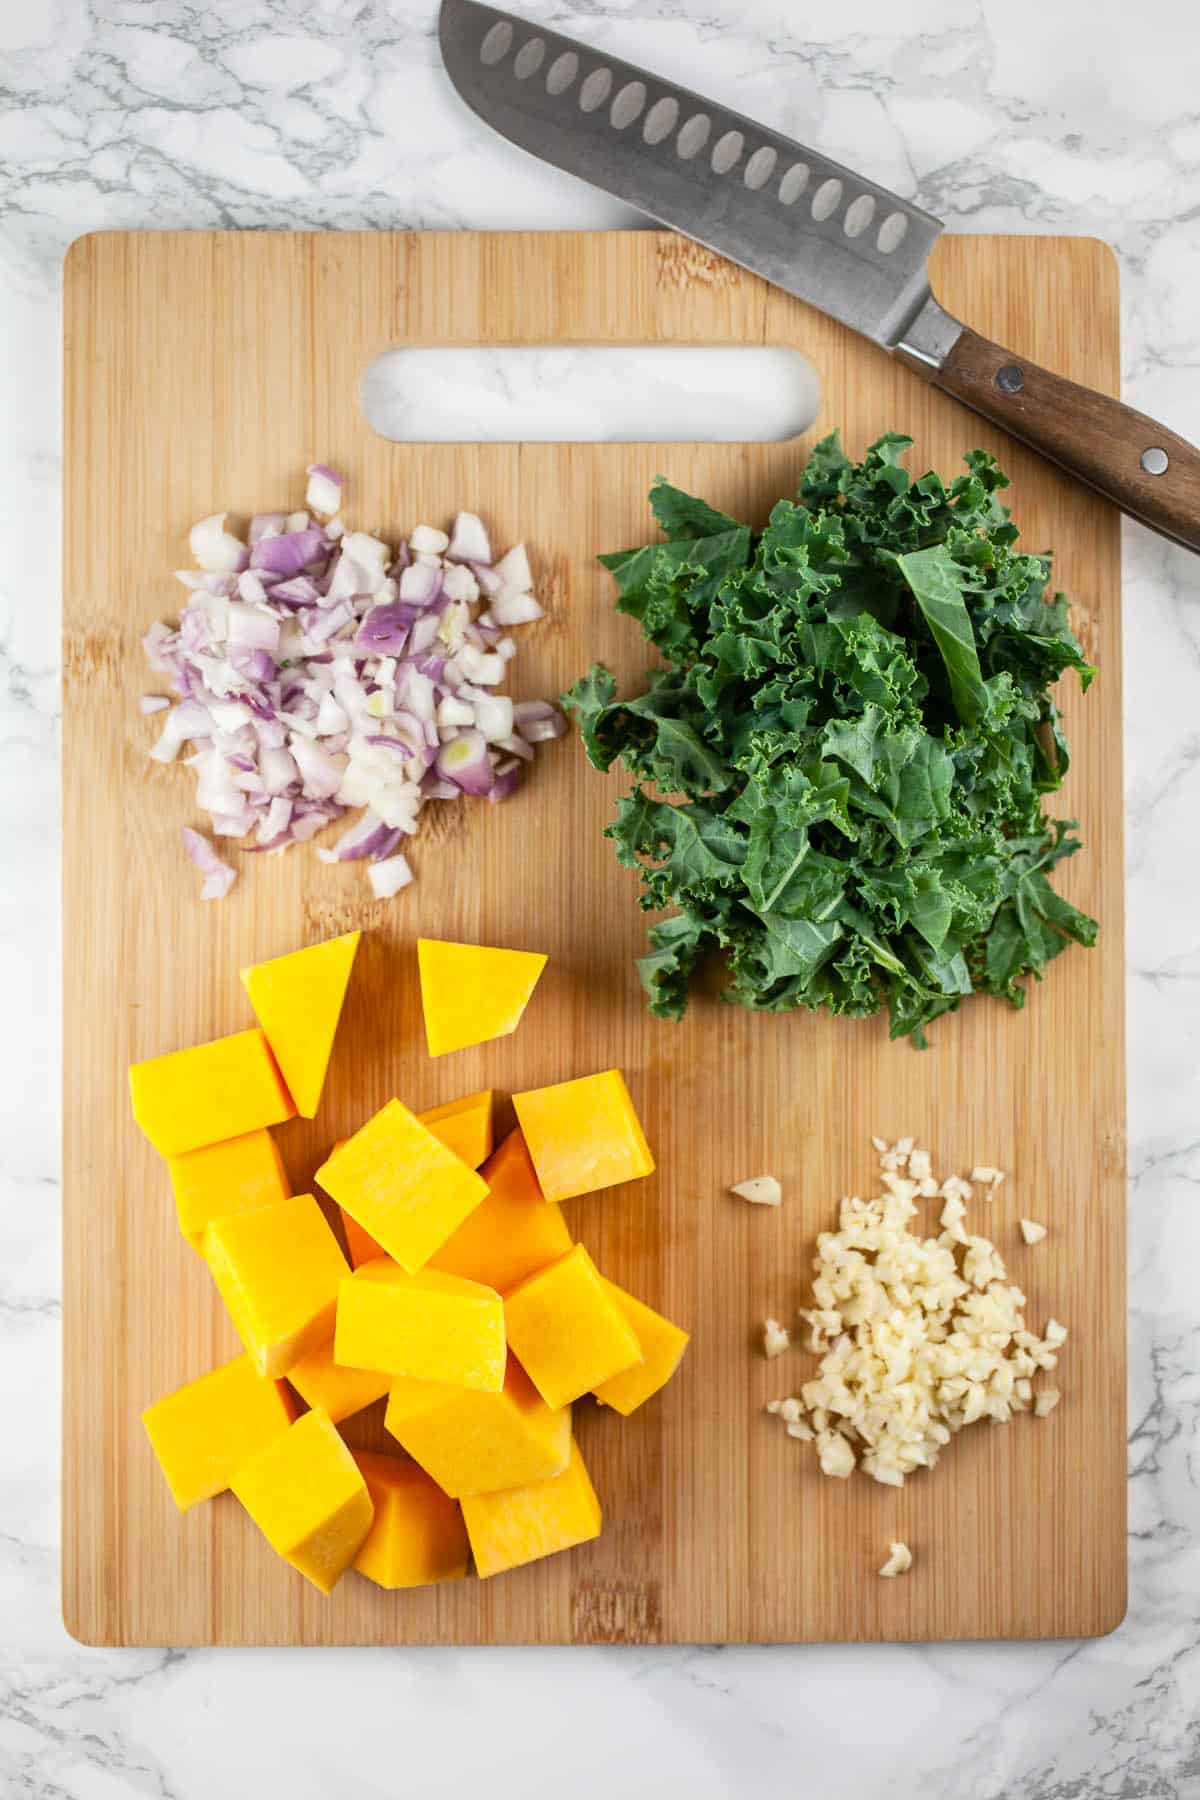 Squash chunks, minced garlic and onions, and chopped kale on wooden cutting board.